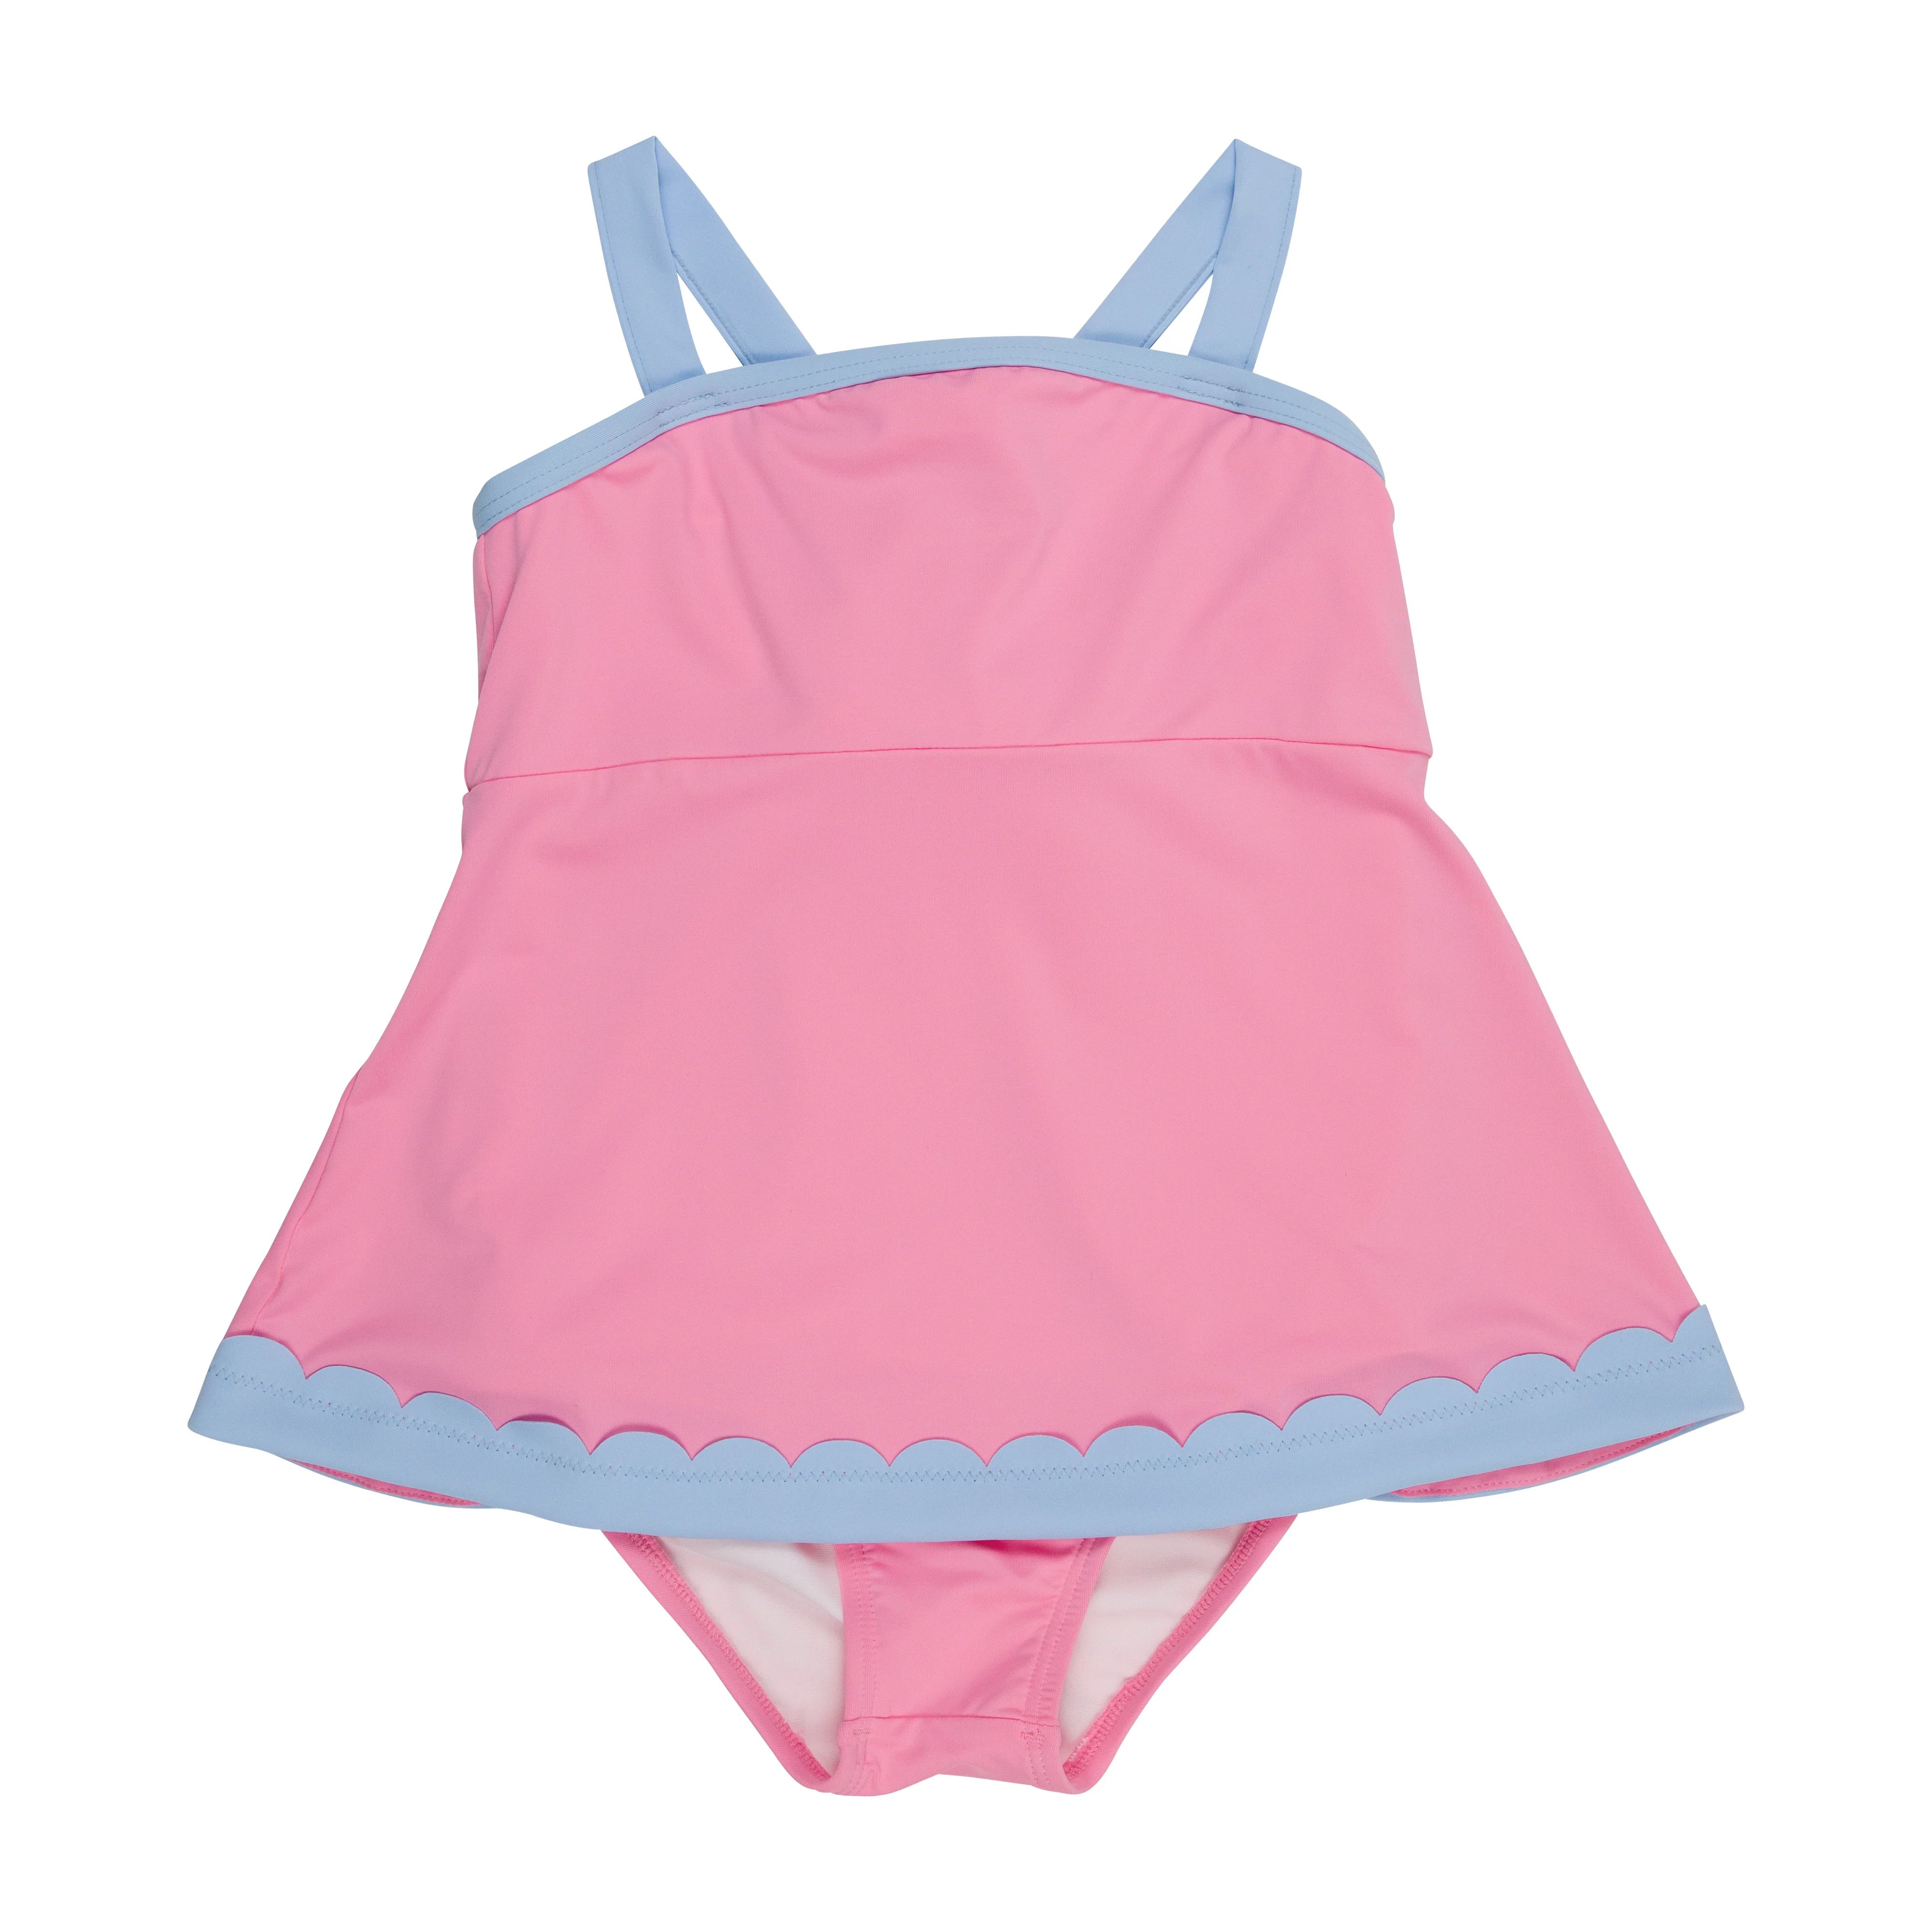 Sanctuary Scallop Swimsuit - Hamptons Hot Pink with Beale Street Blue & Worth Avenue White | The Beaufort Bonnet Company